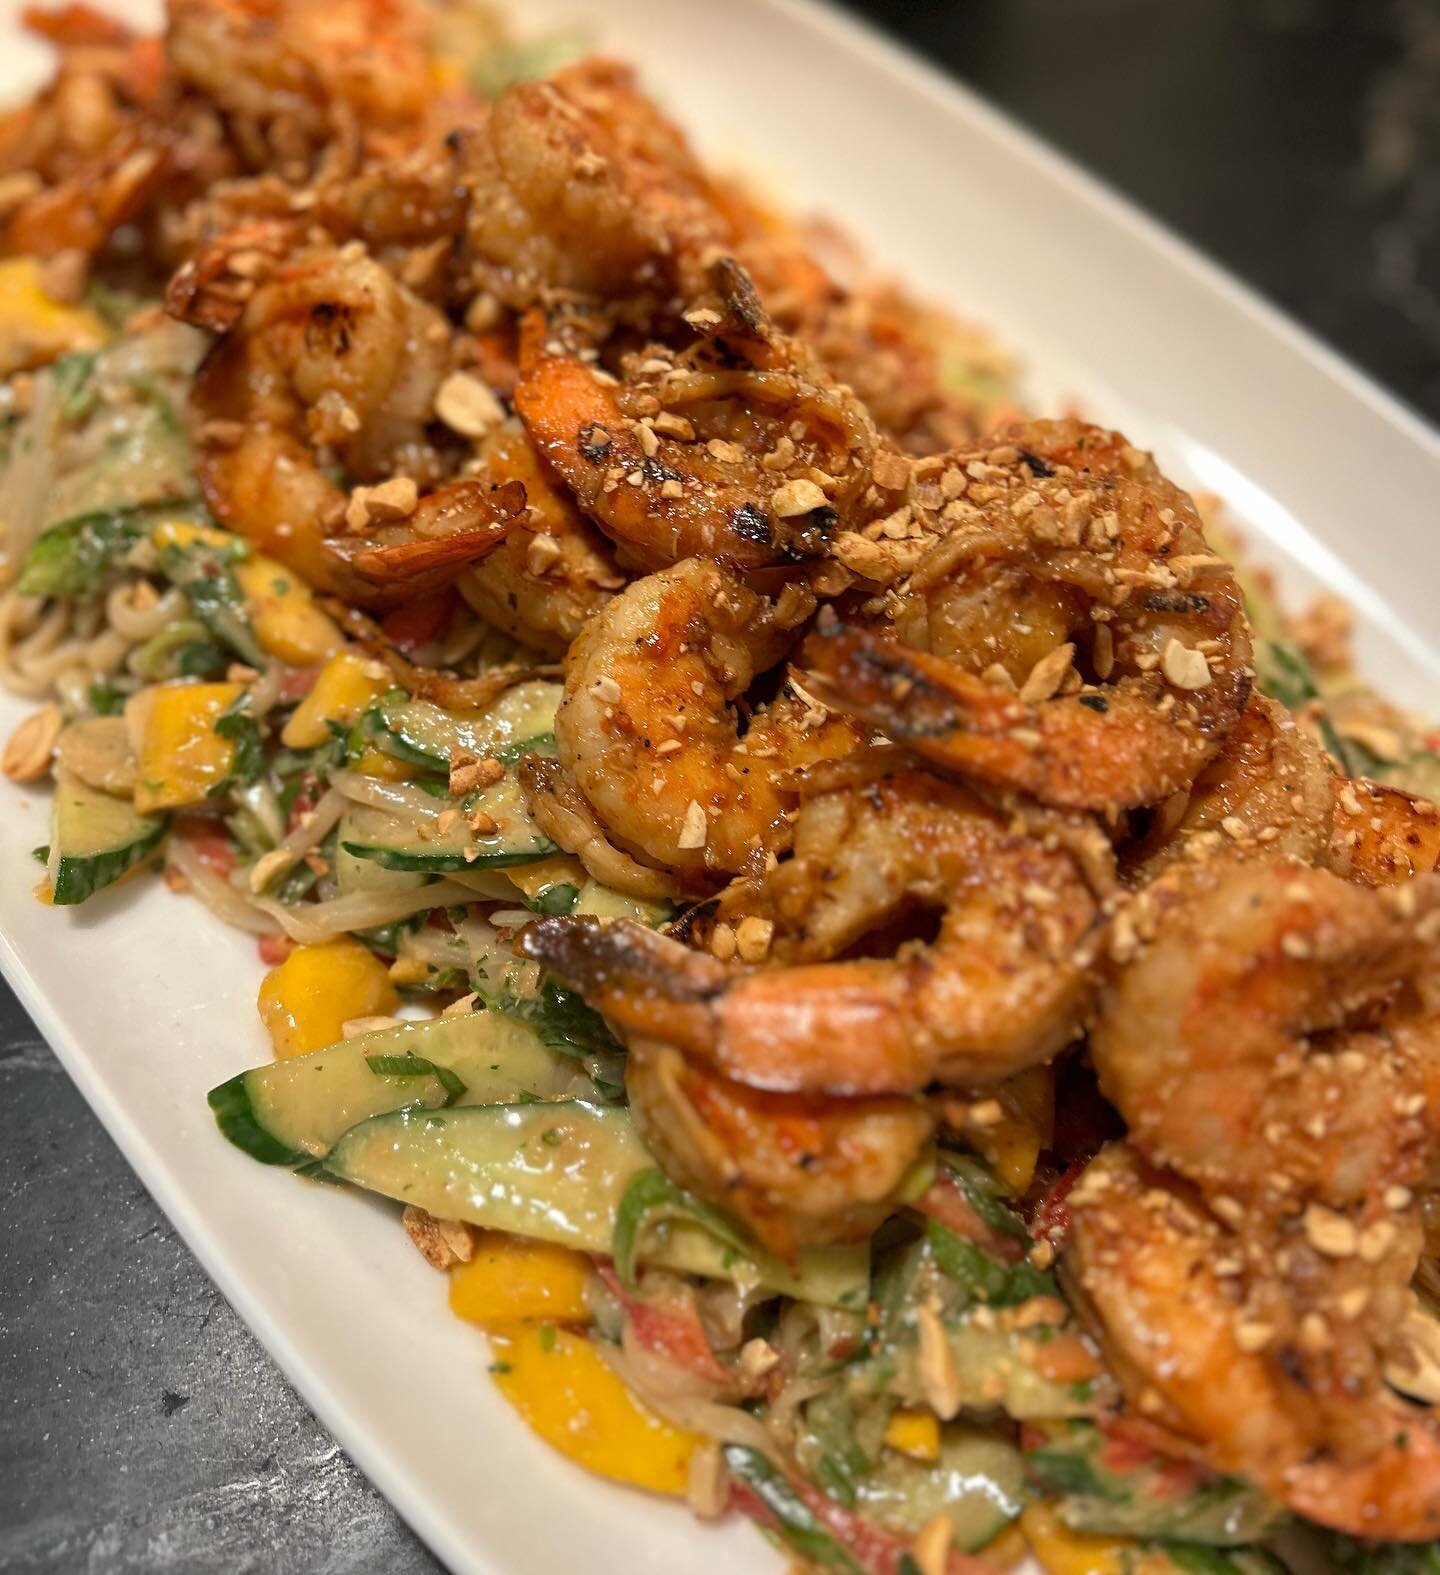 This is another summer dish I made for a client this week!! It&rsquo;s chilled rice noodles with English cucumbers, red bell peppers, scallions, mangos, tossed in a ginger cilantro peanut sauce! The grilled shrimp topped with chopped peanuts added th